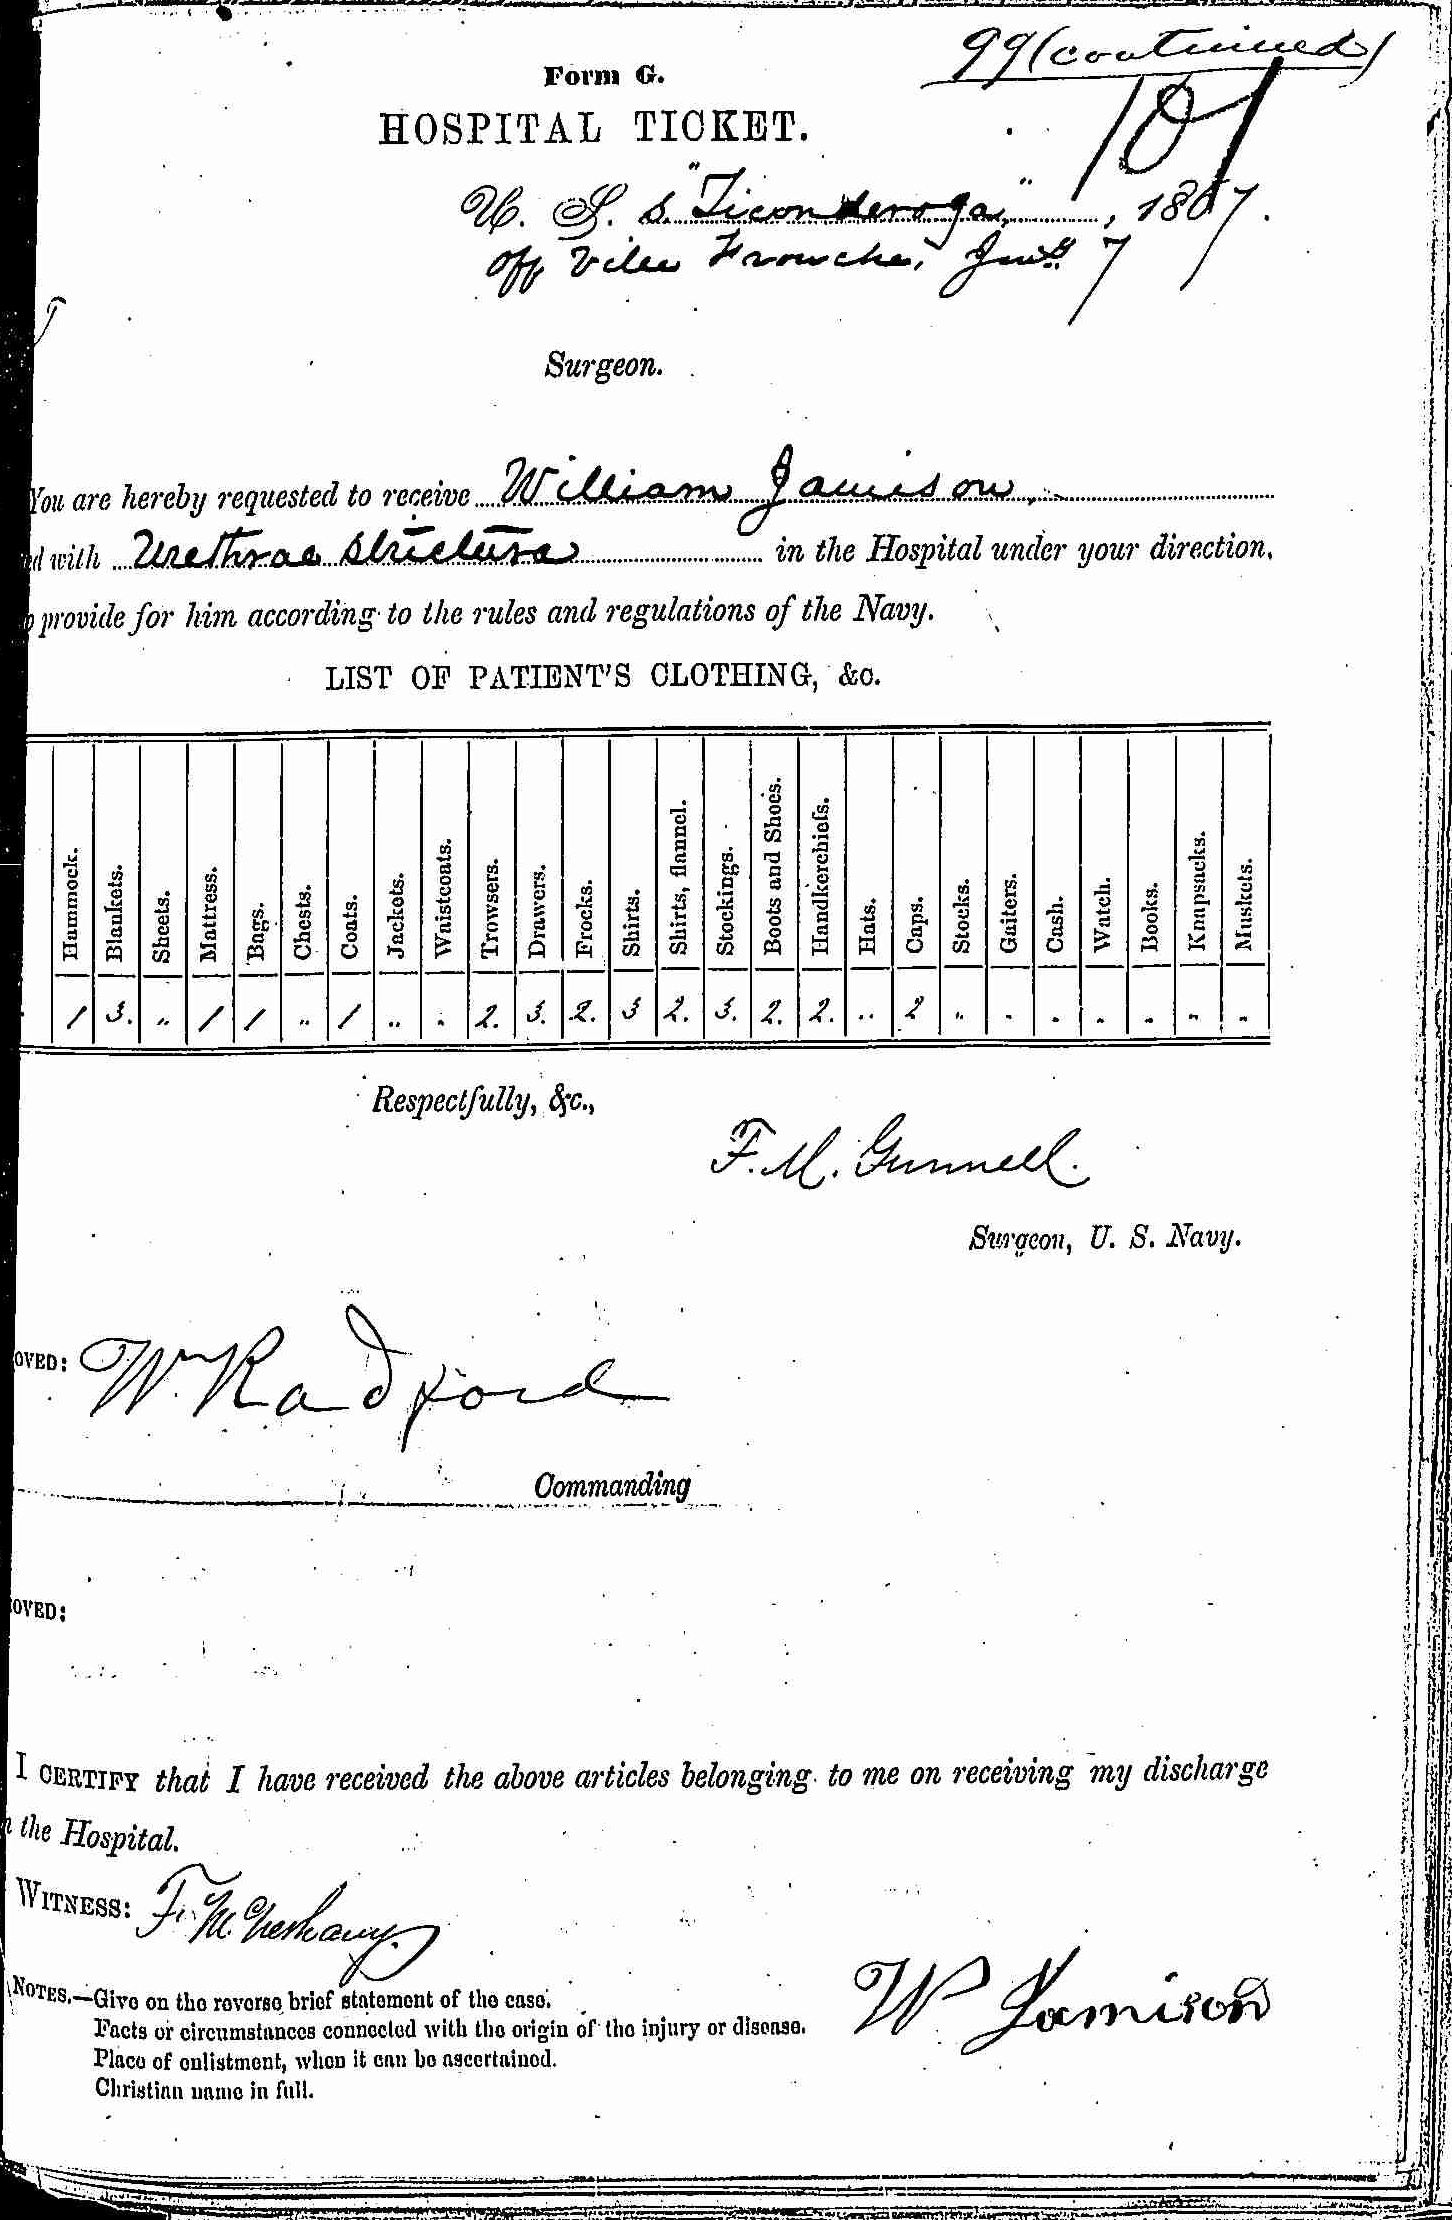 Entry for William Jamison (page 4 of 5) in the log Hospital Tickets and Case Papers - Naval Hospital - Washington, D.C. - 1866-68